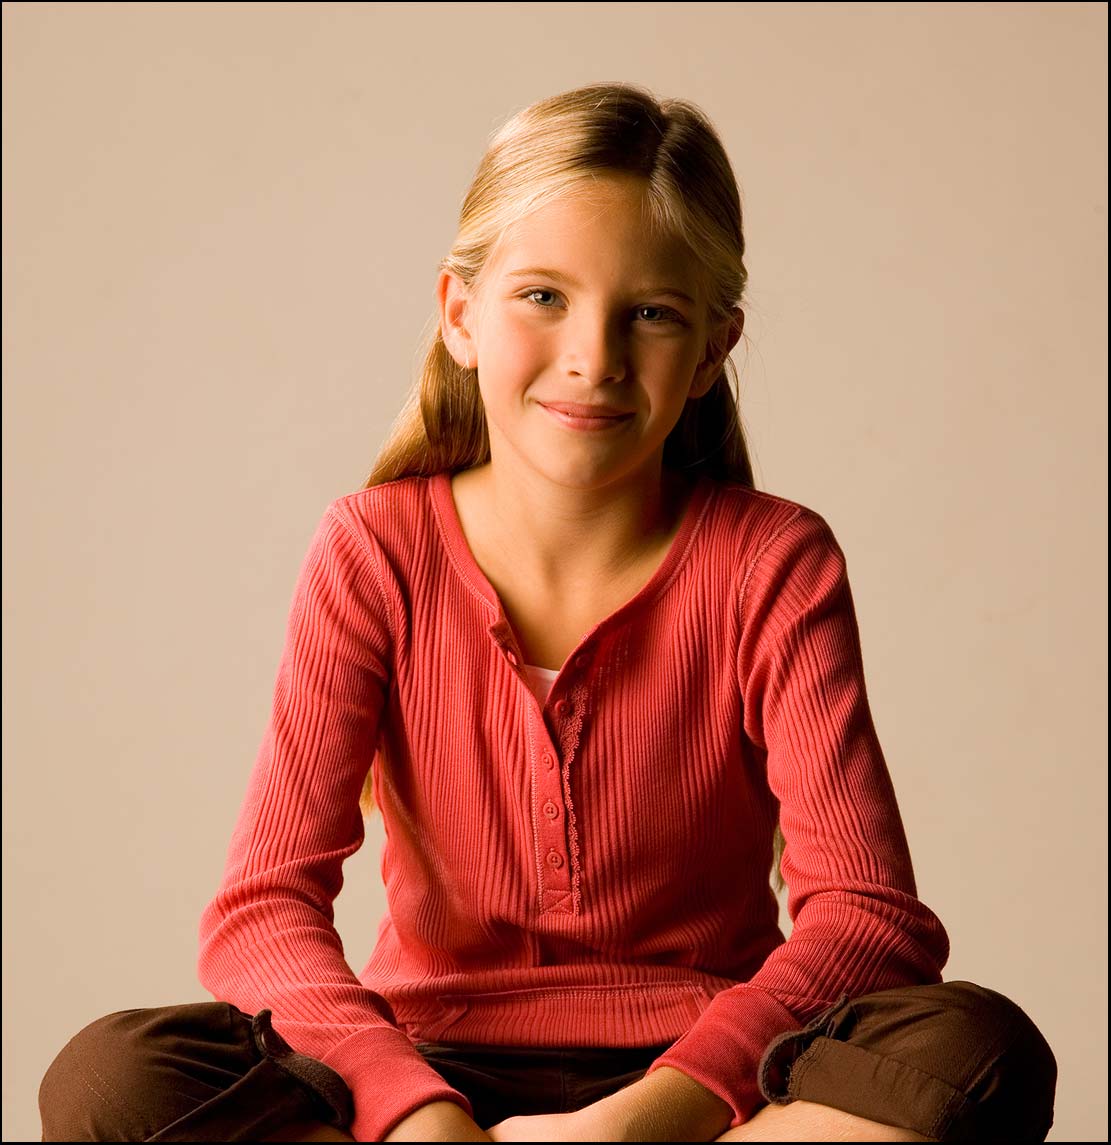 Young Girl sitting in the studio